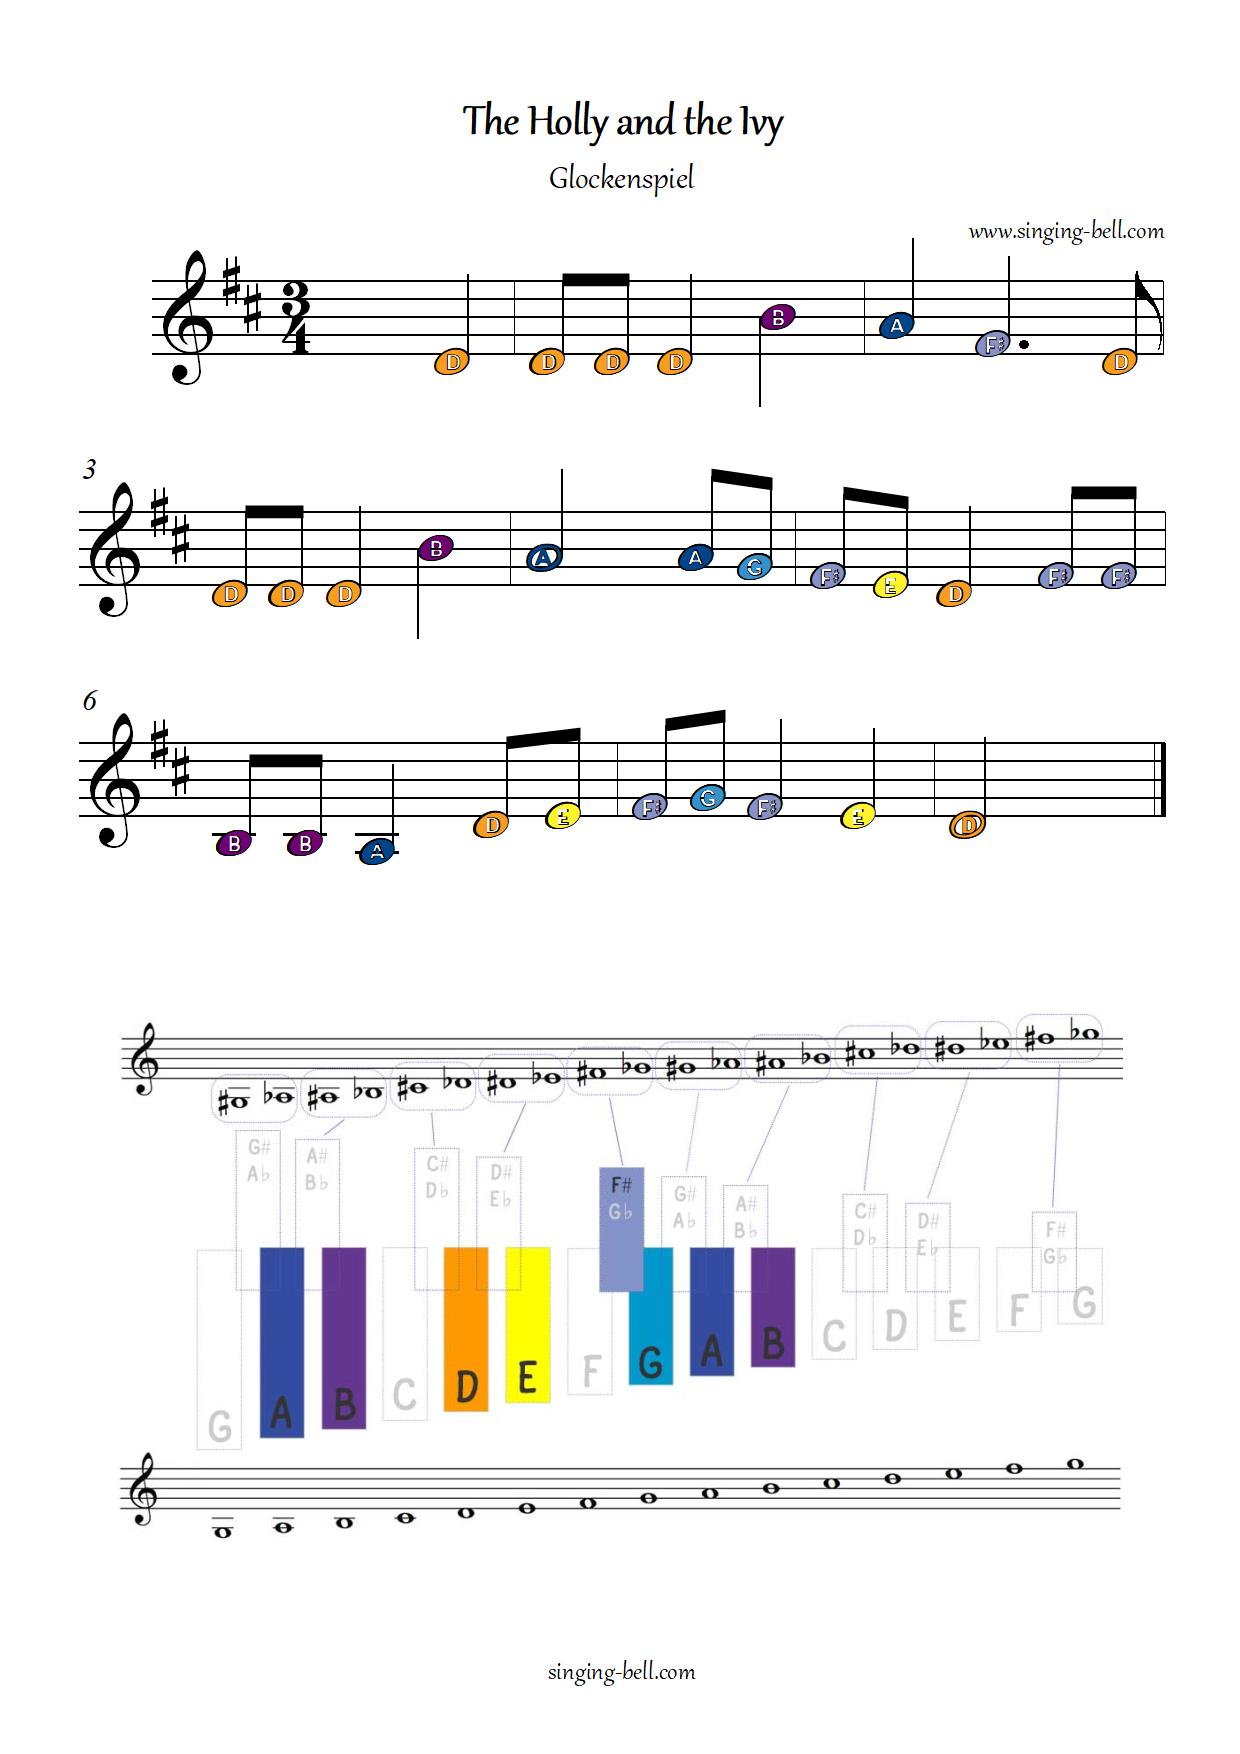 The Holly and the Ivy free xylophone glockenspiel sheet music color notes chart pdf